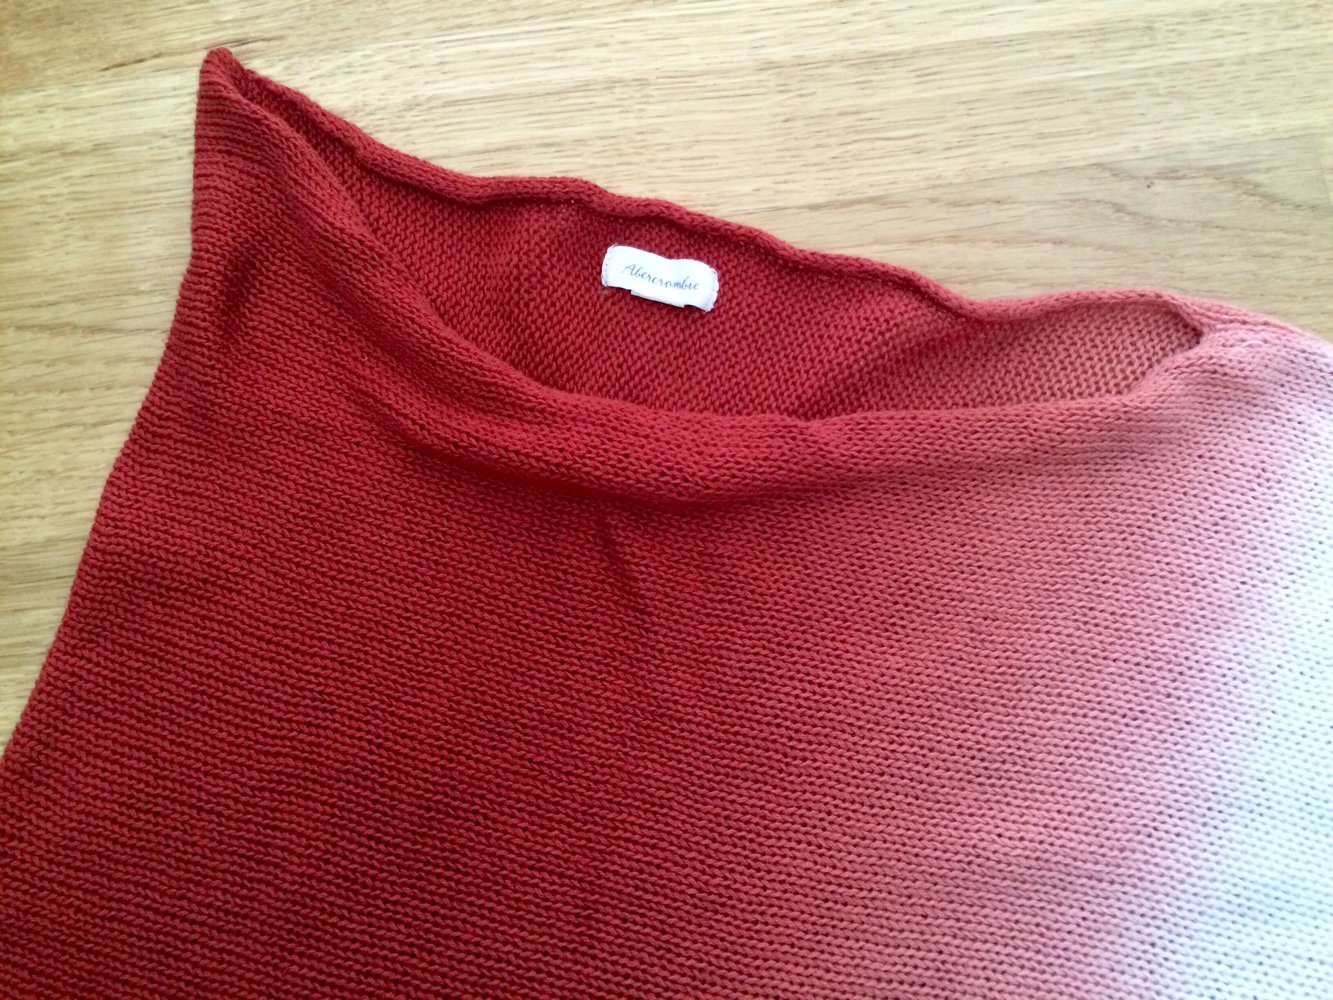 Abercrombie & Fitch Poncho Pullover Shirt Jacke S M rot weiß